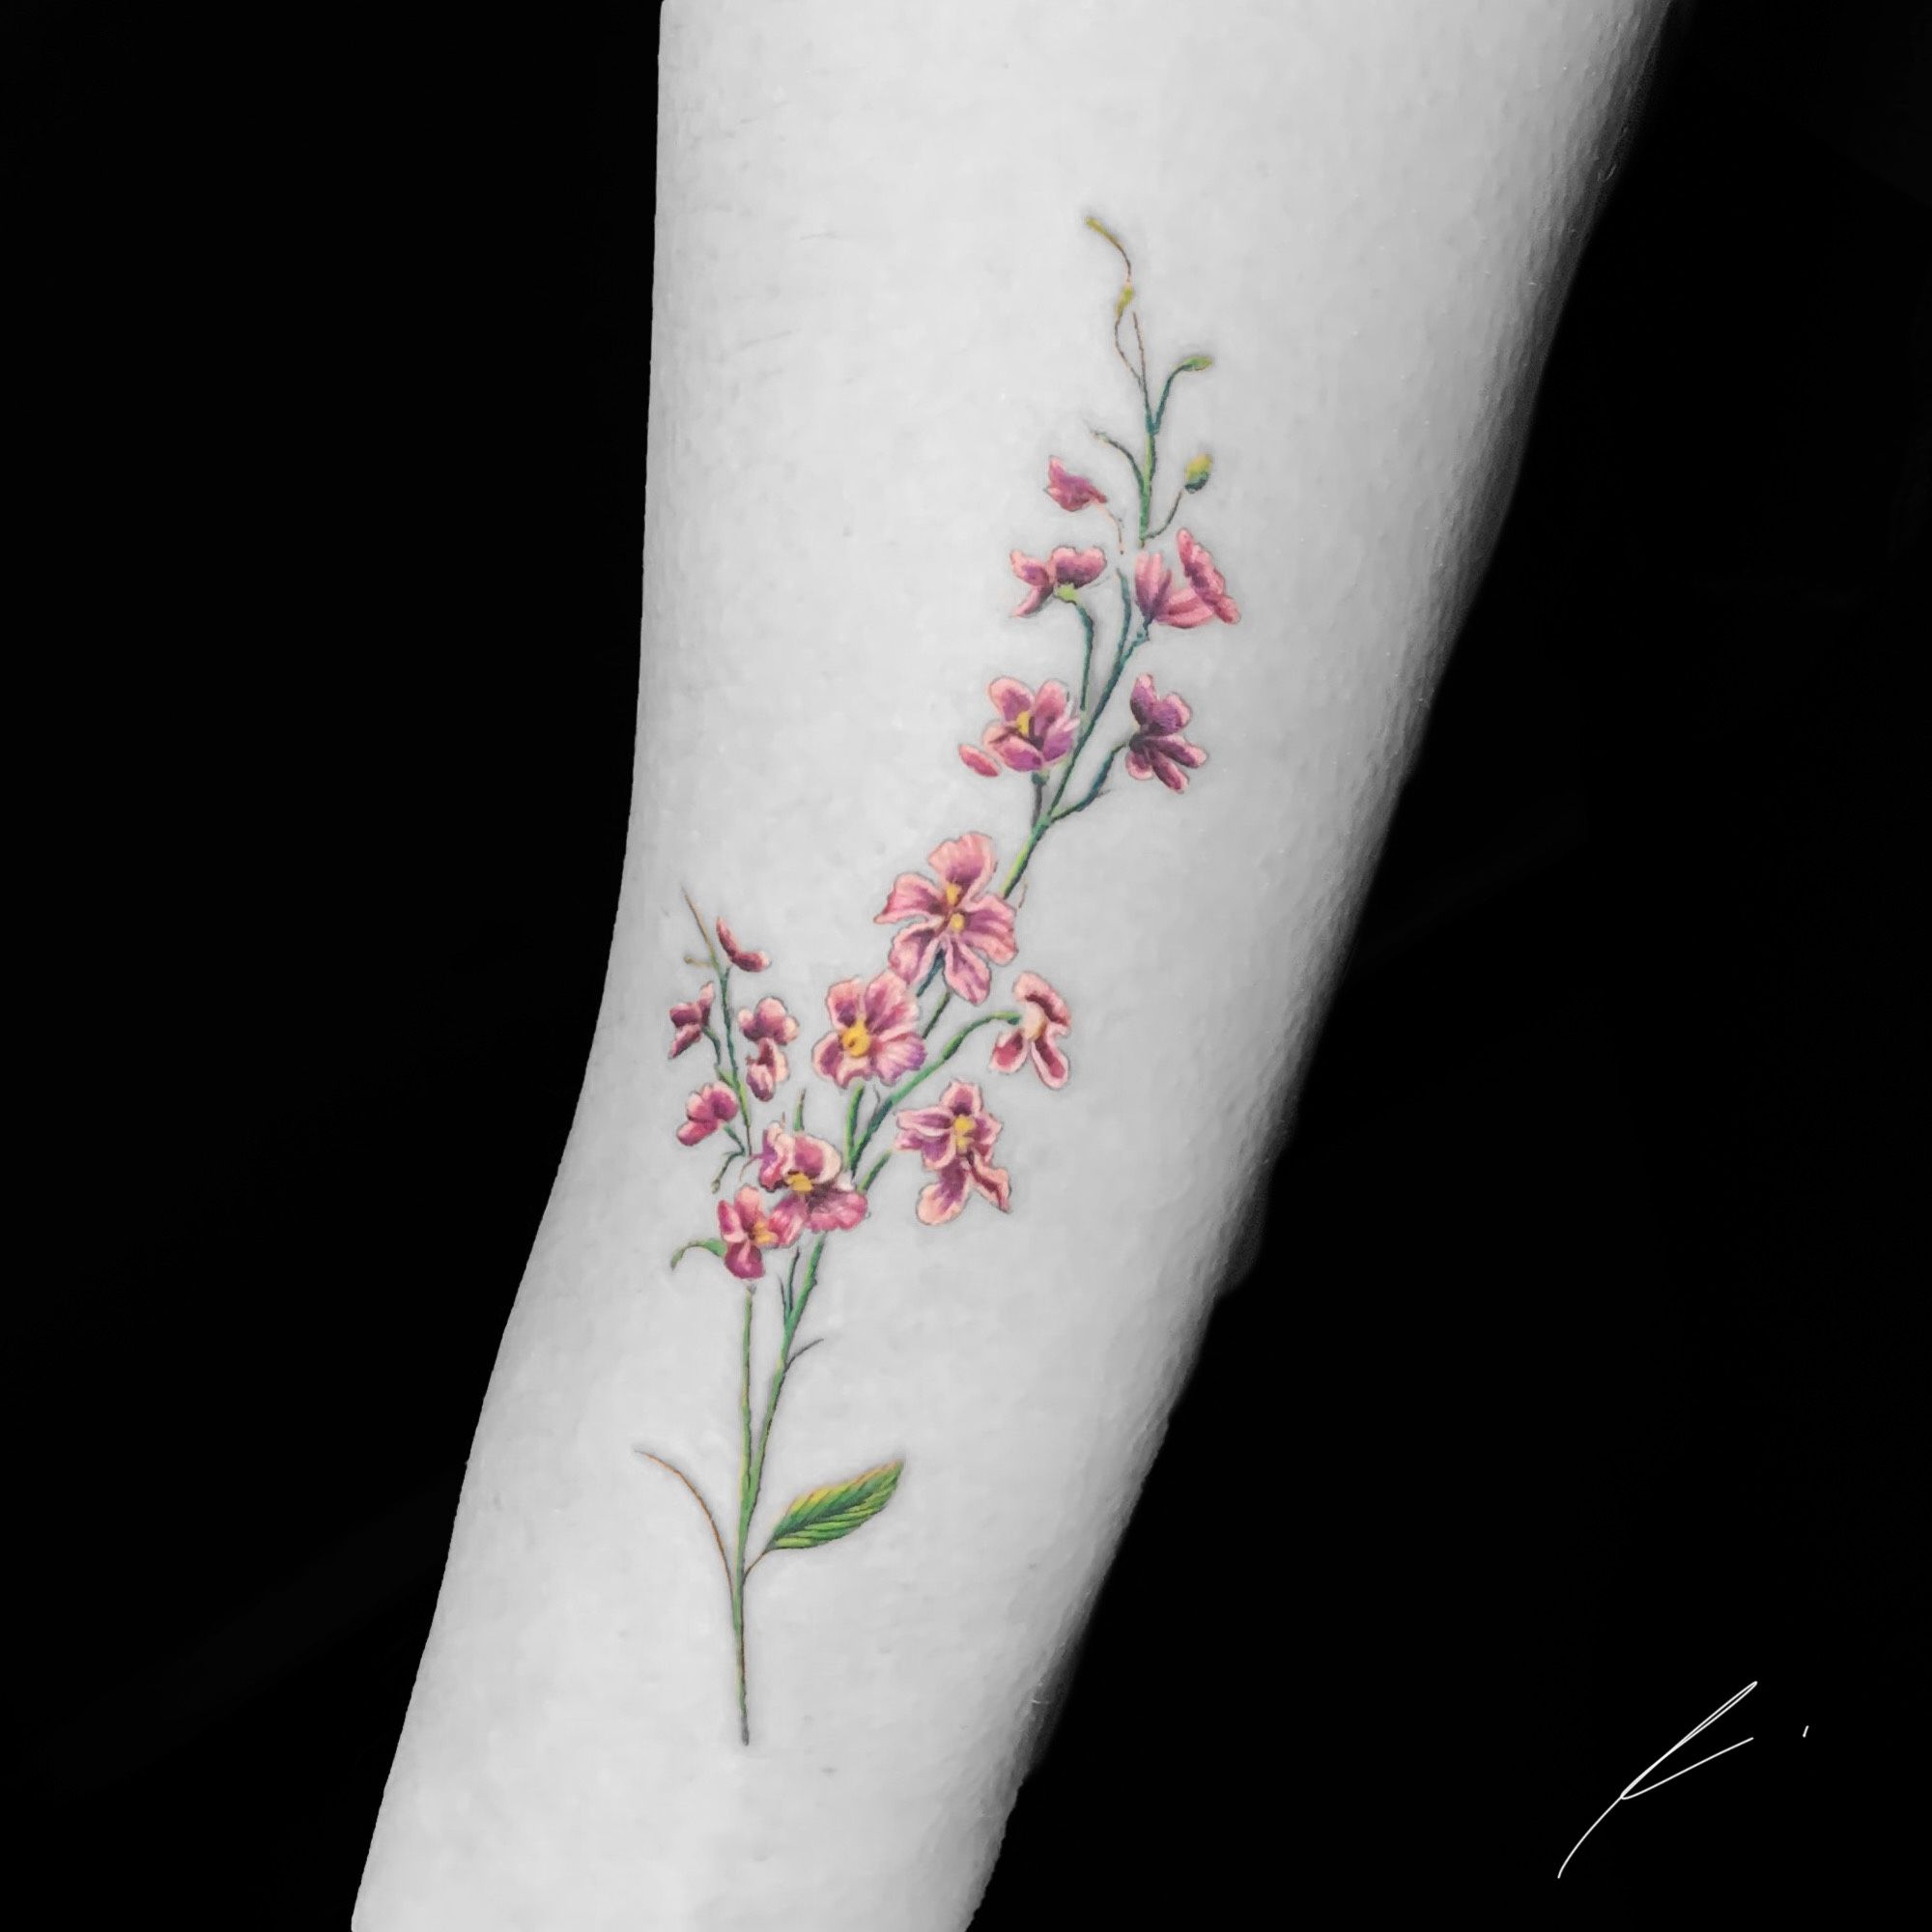 The 10 Best Larkspur Flower Tattoo Designs to Try in 2023